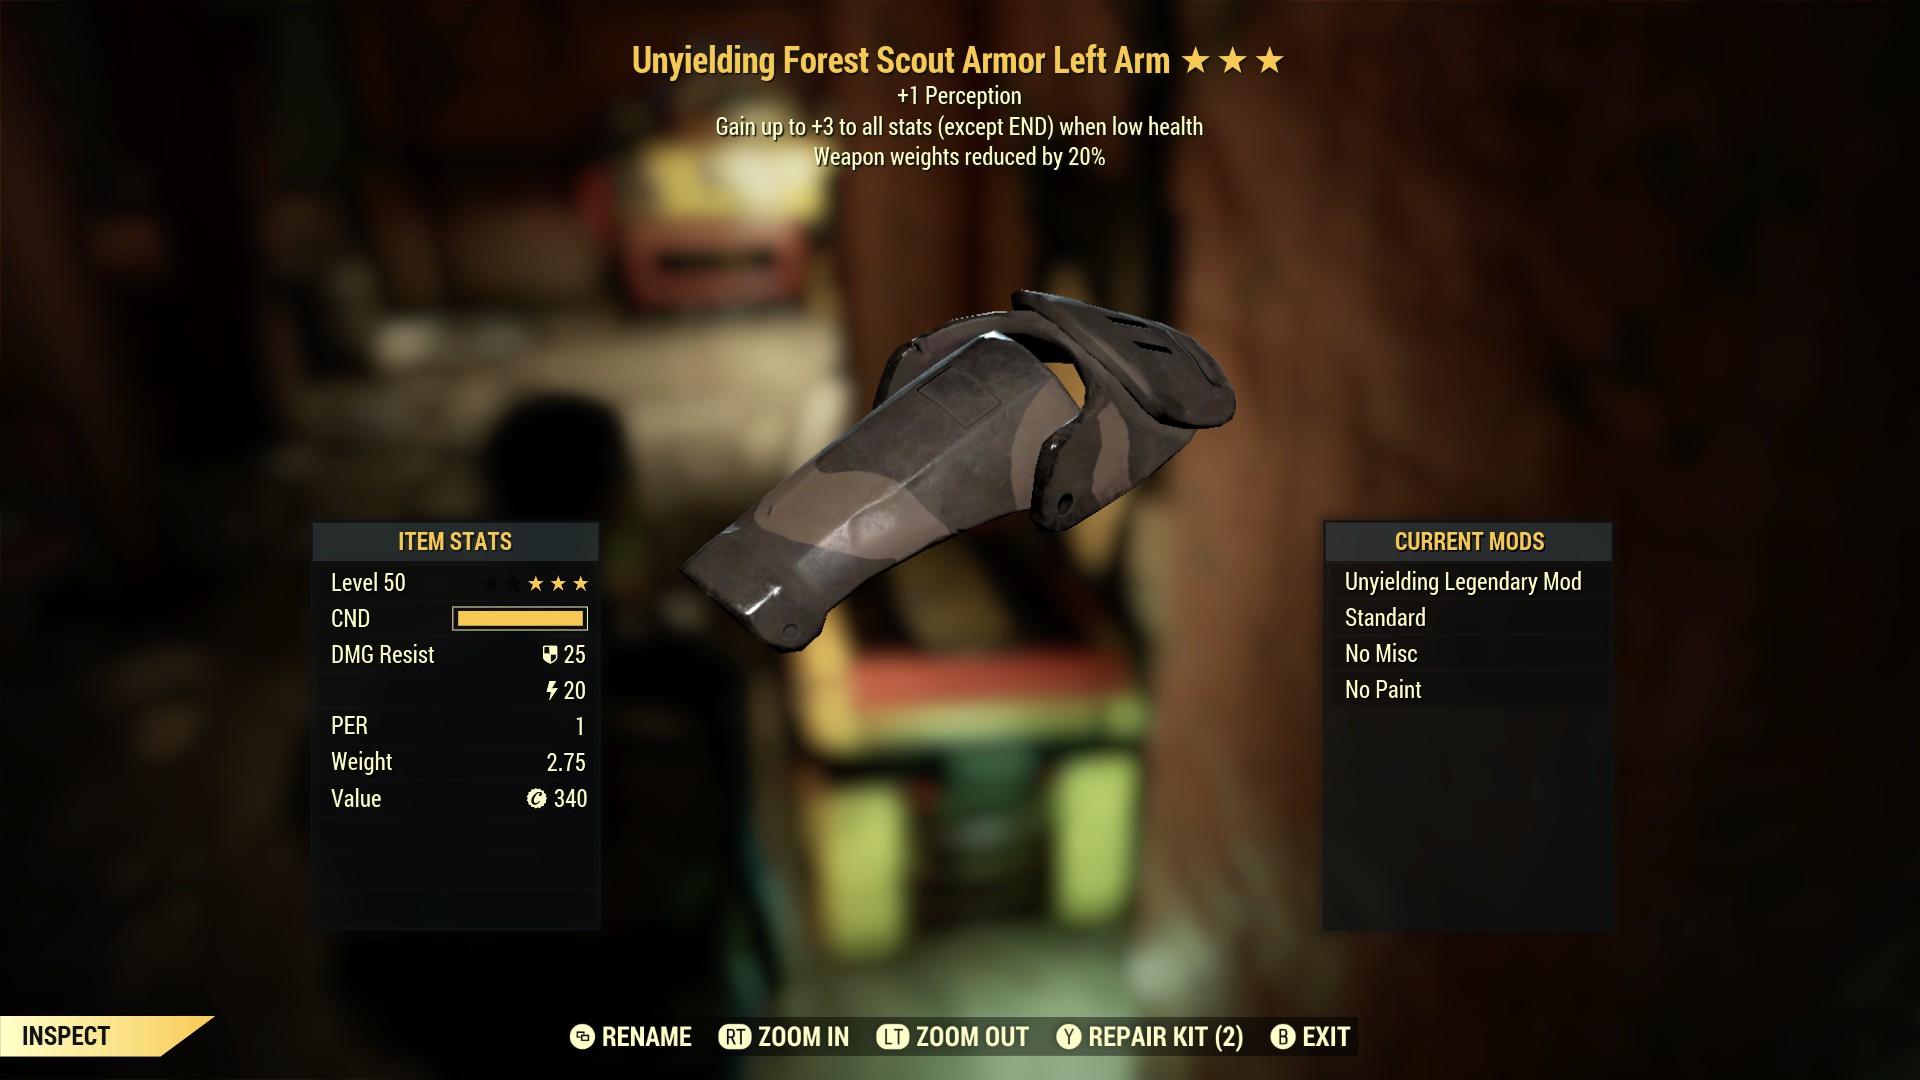 Unyielding Forest Scout Armor Left Arm